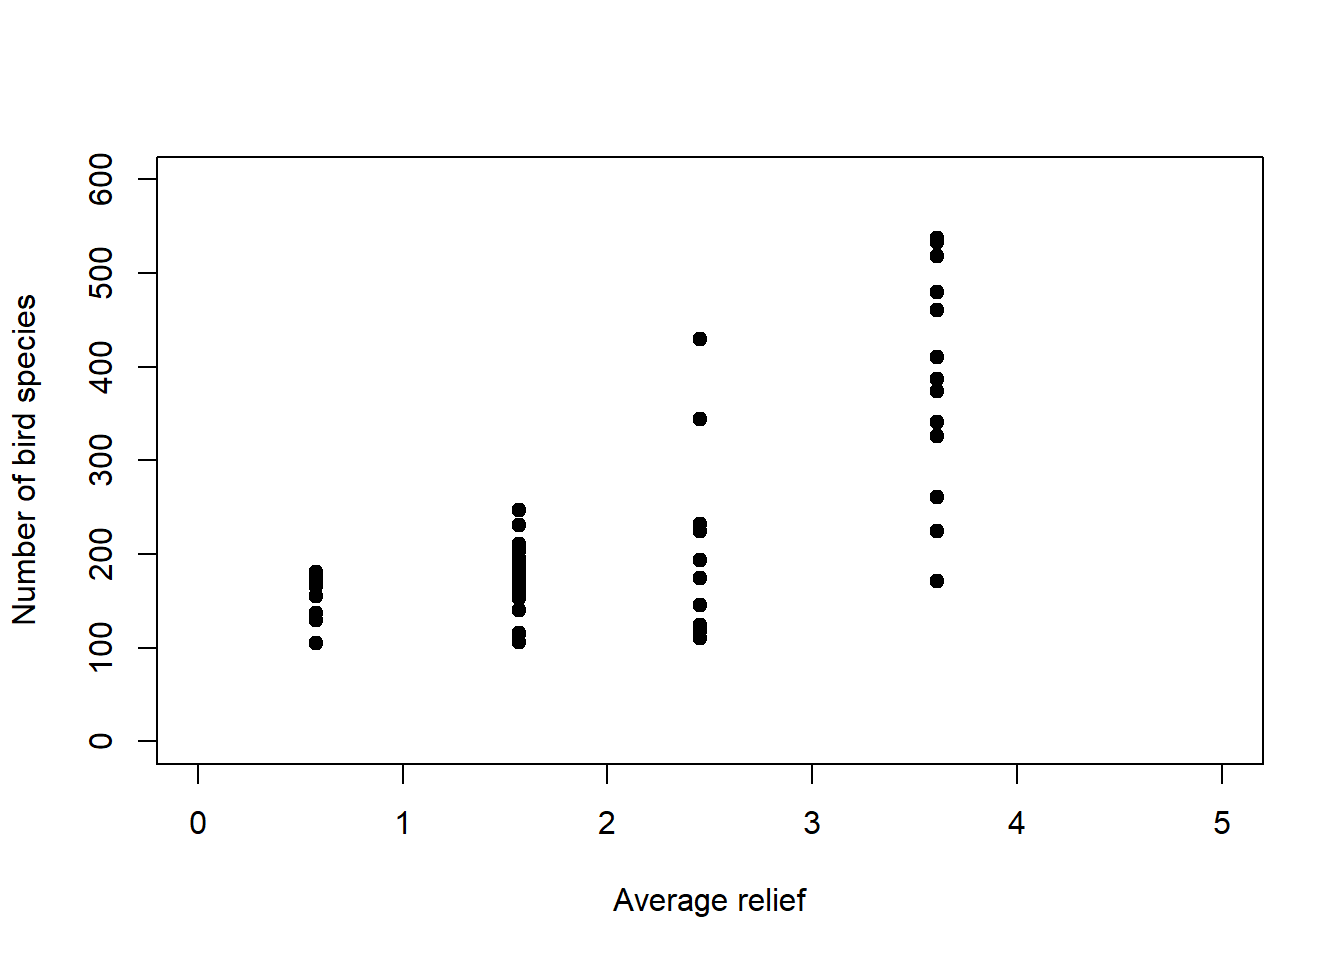 Left: Number of bird species as a function of average relief. Data from: @piegorsch2005. Right: In this example the variance of $y$ increases with the mean response of $y$.